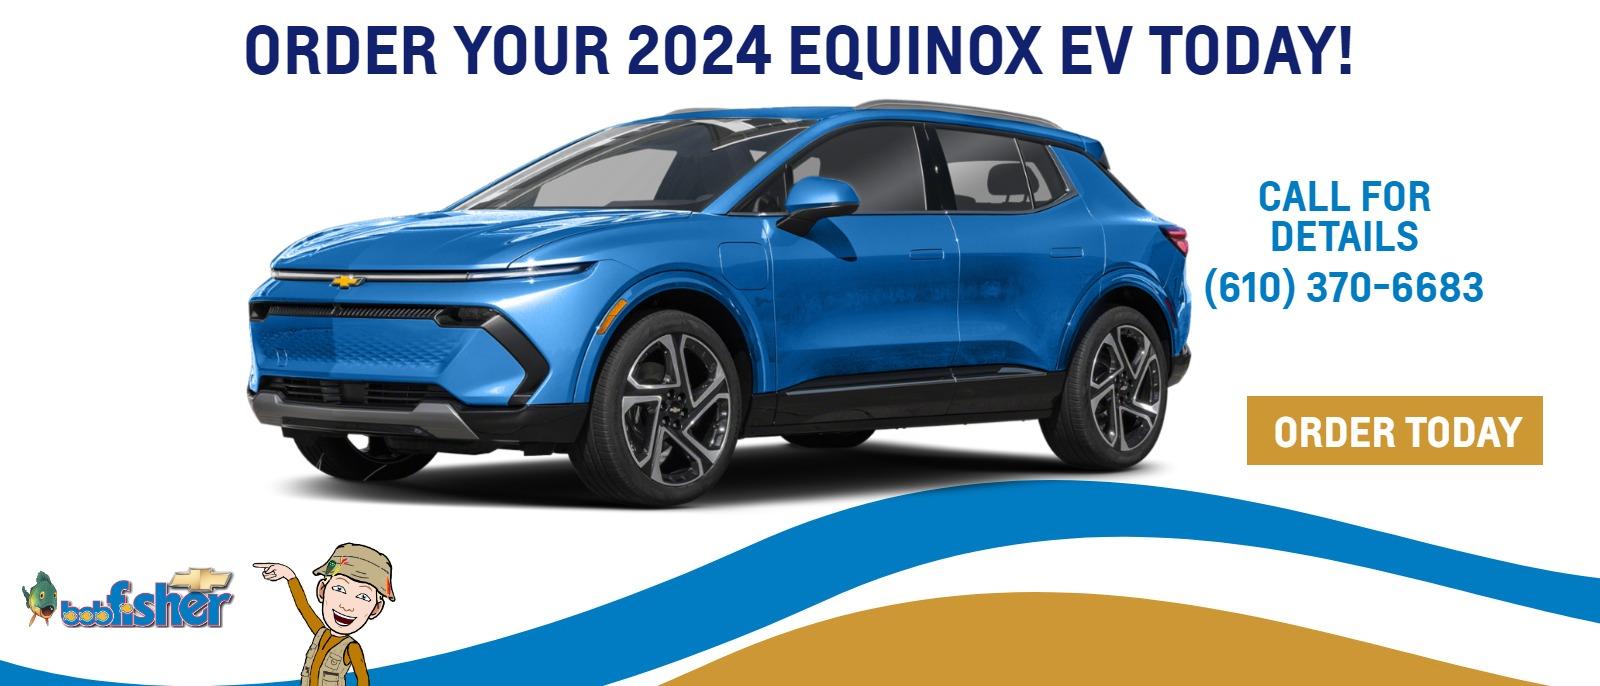 Order Your 2024 Equinox EV Today!
CALL FOR DETAILS (610) 370-6683